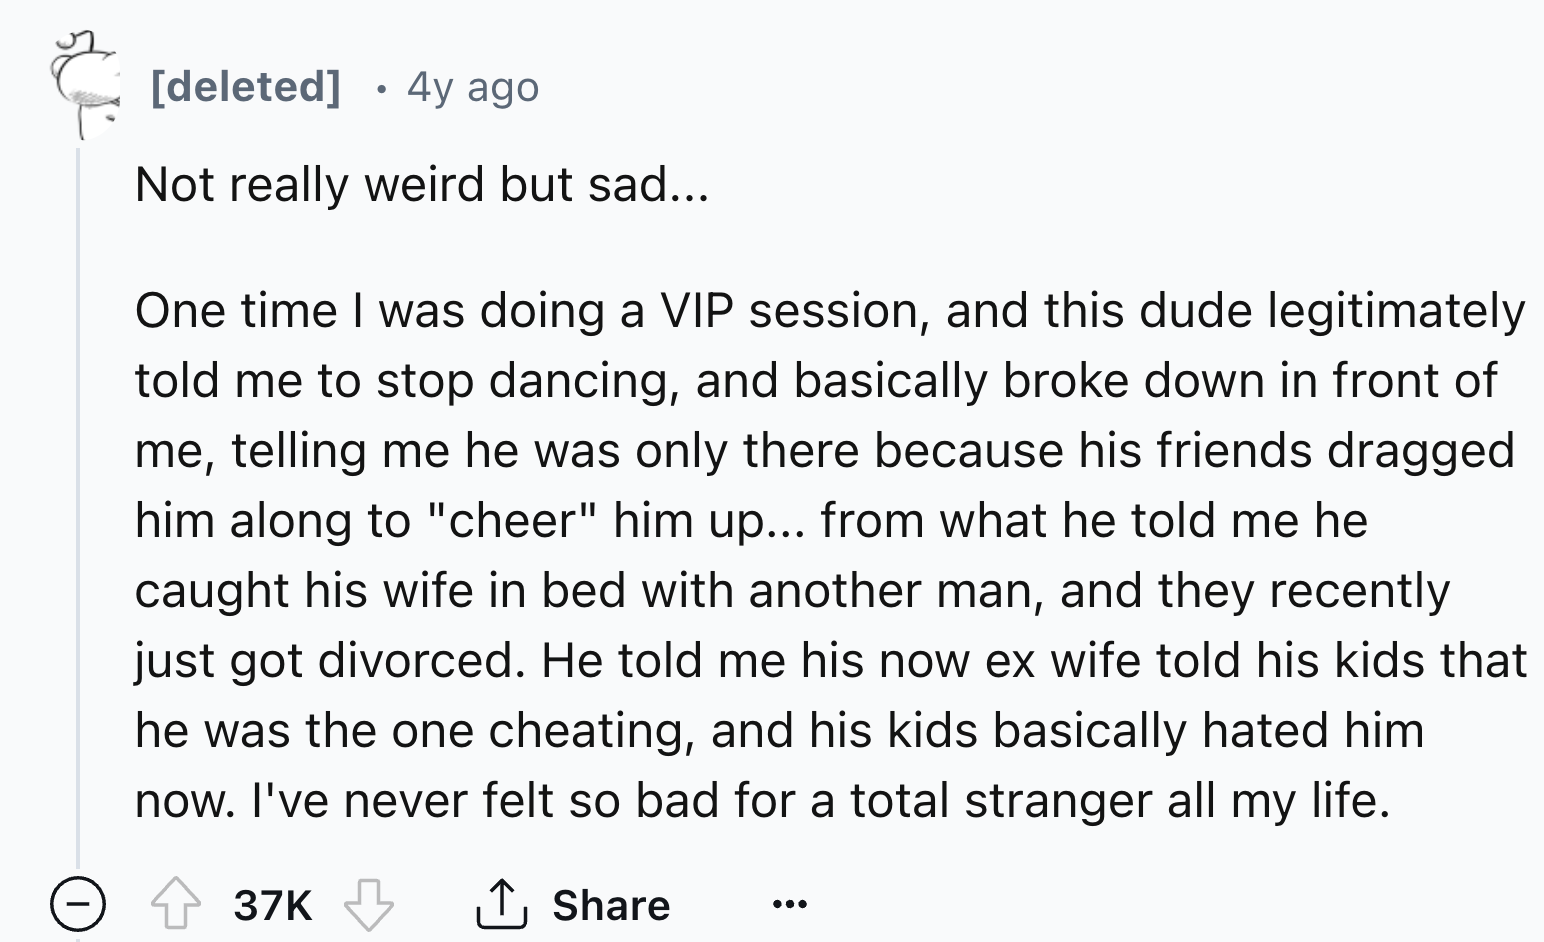 number - deleted 4y ago Not really weird but sad... One time I was doing a Vip session, and this dude legitimately told me to stop dancing, and basically broke down in front of me, telling me he was only there because his friends dragged him along to "che